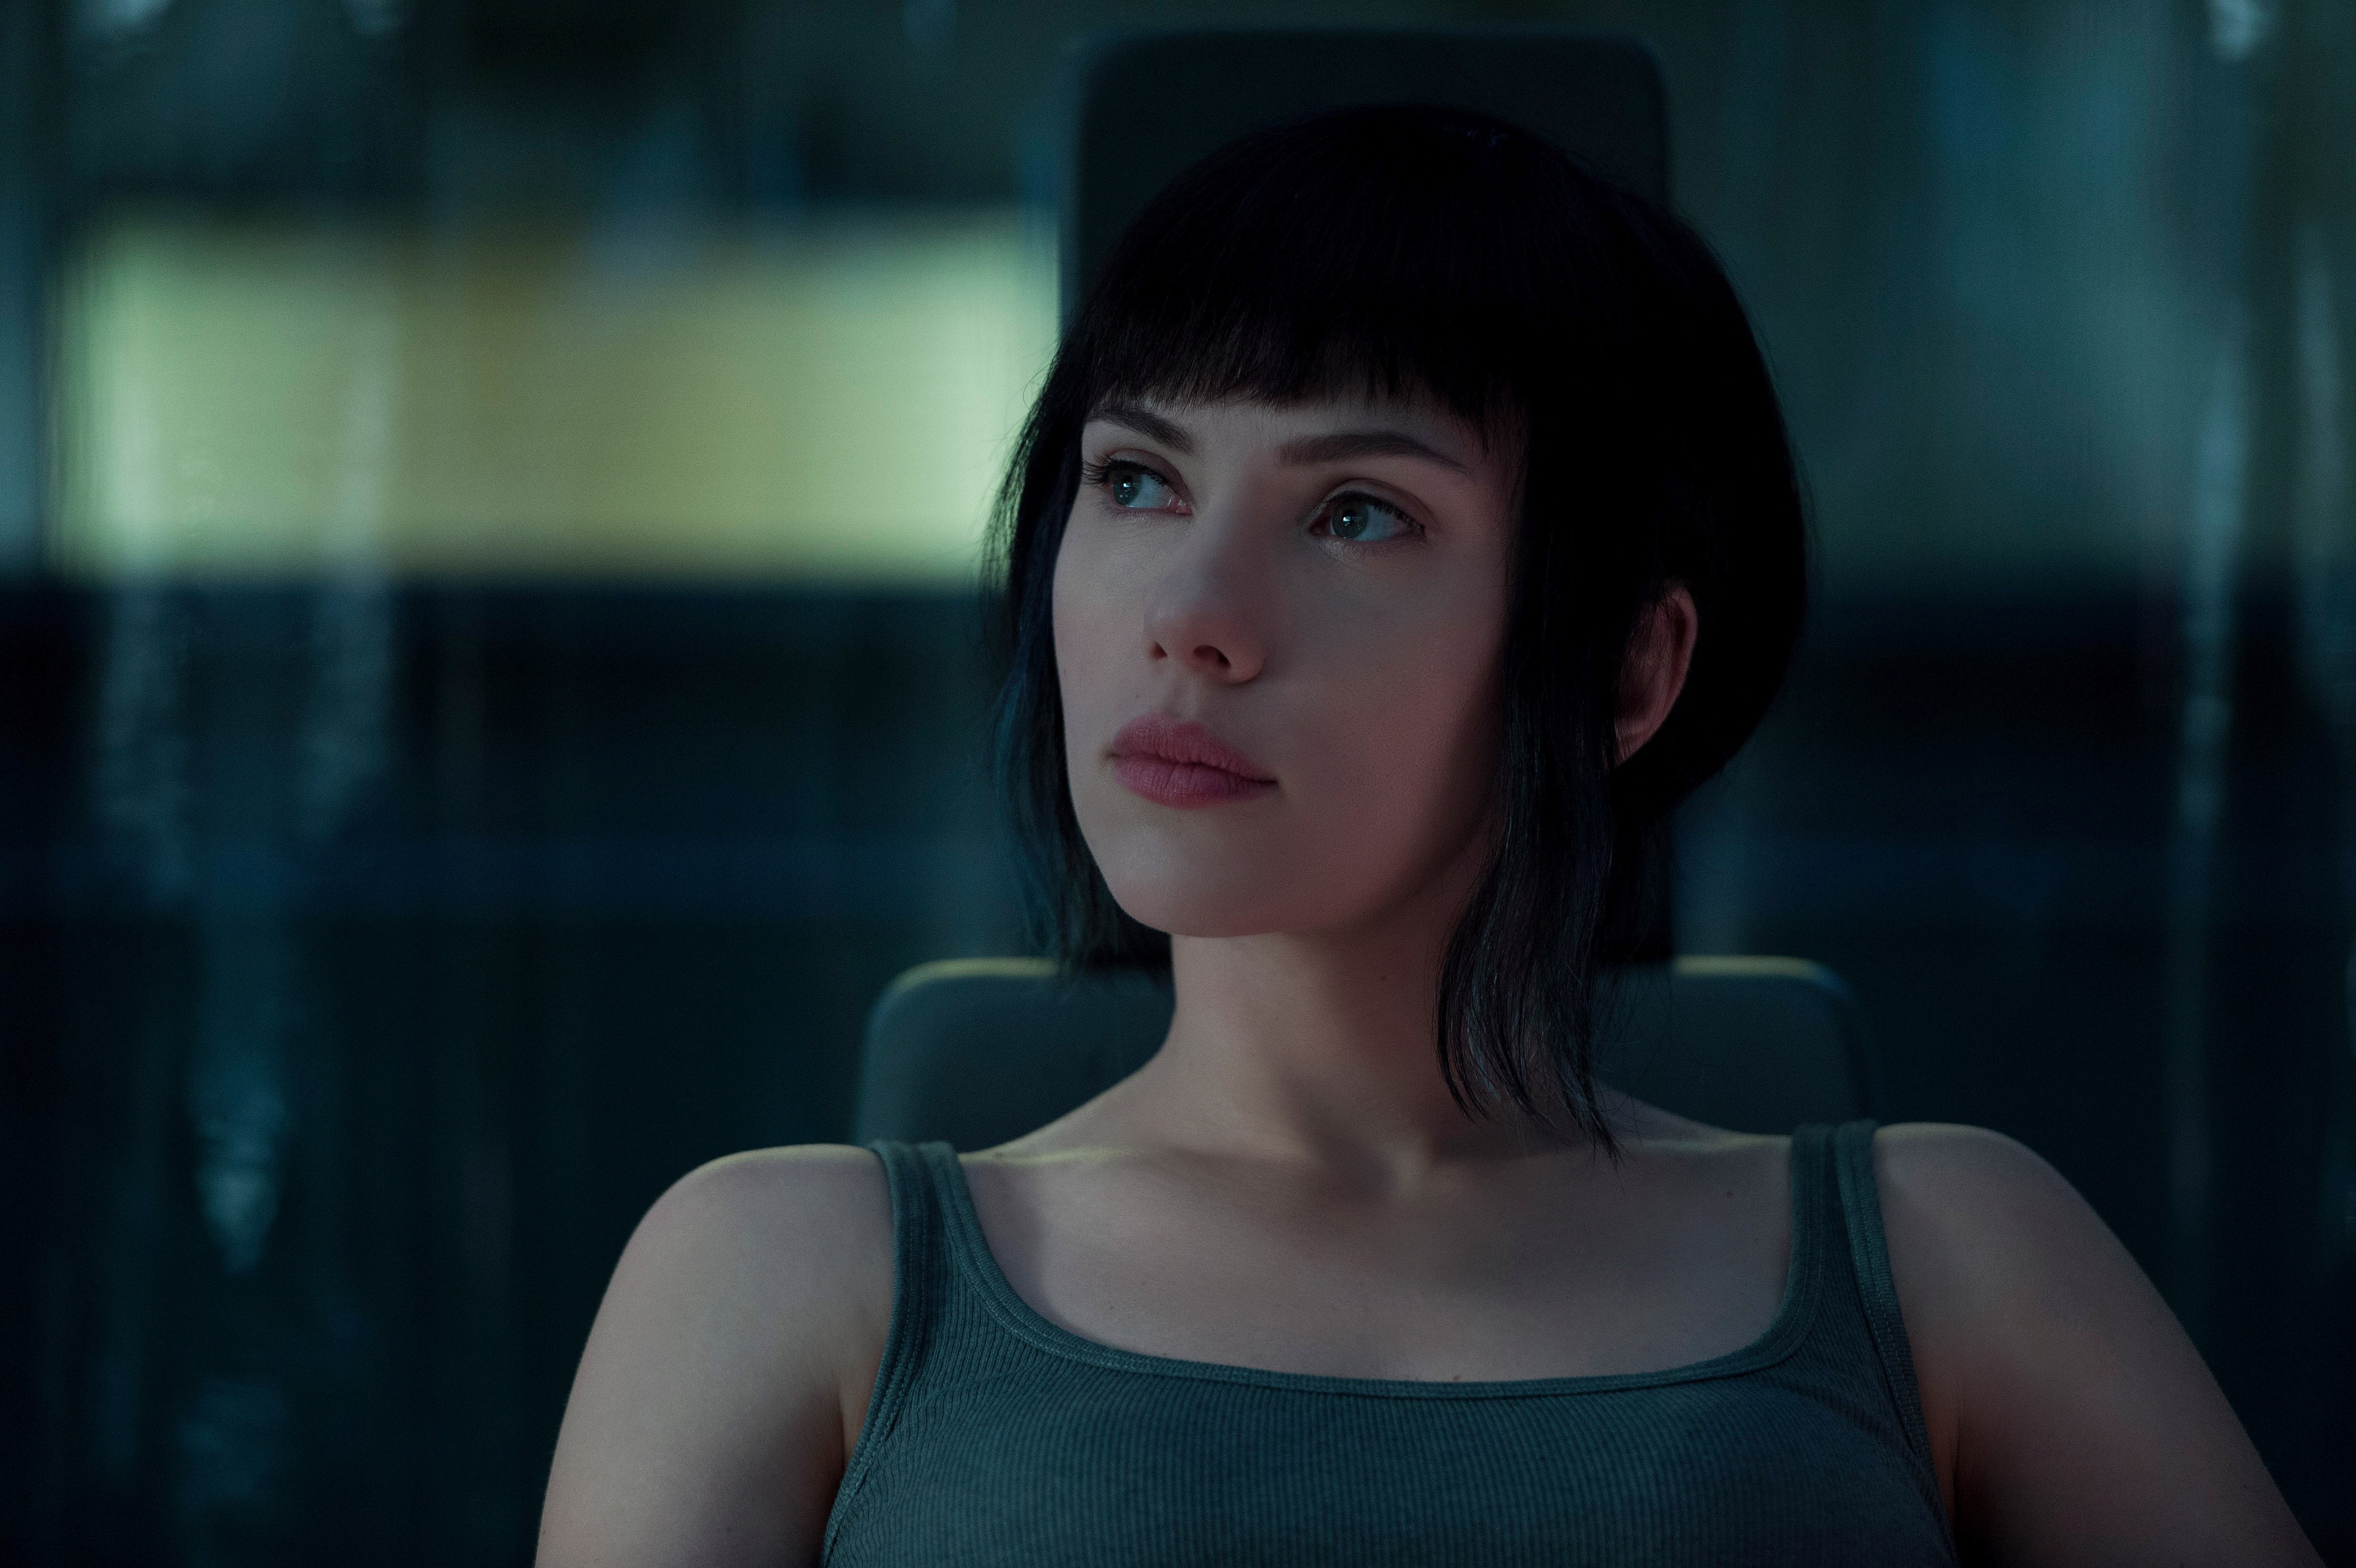 ghost of the shell movie download